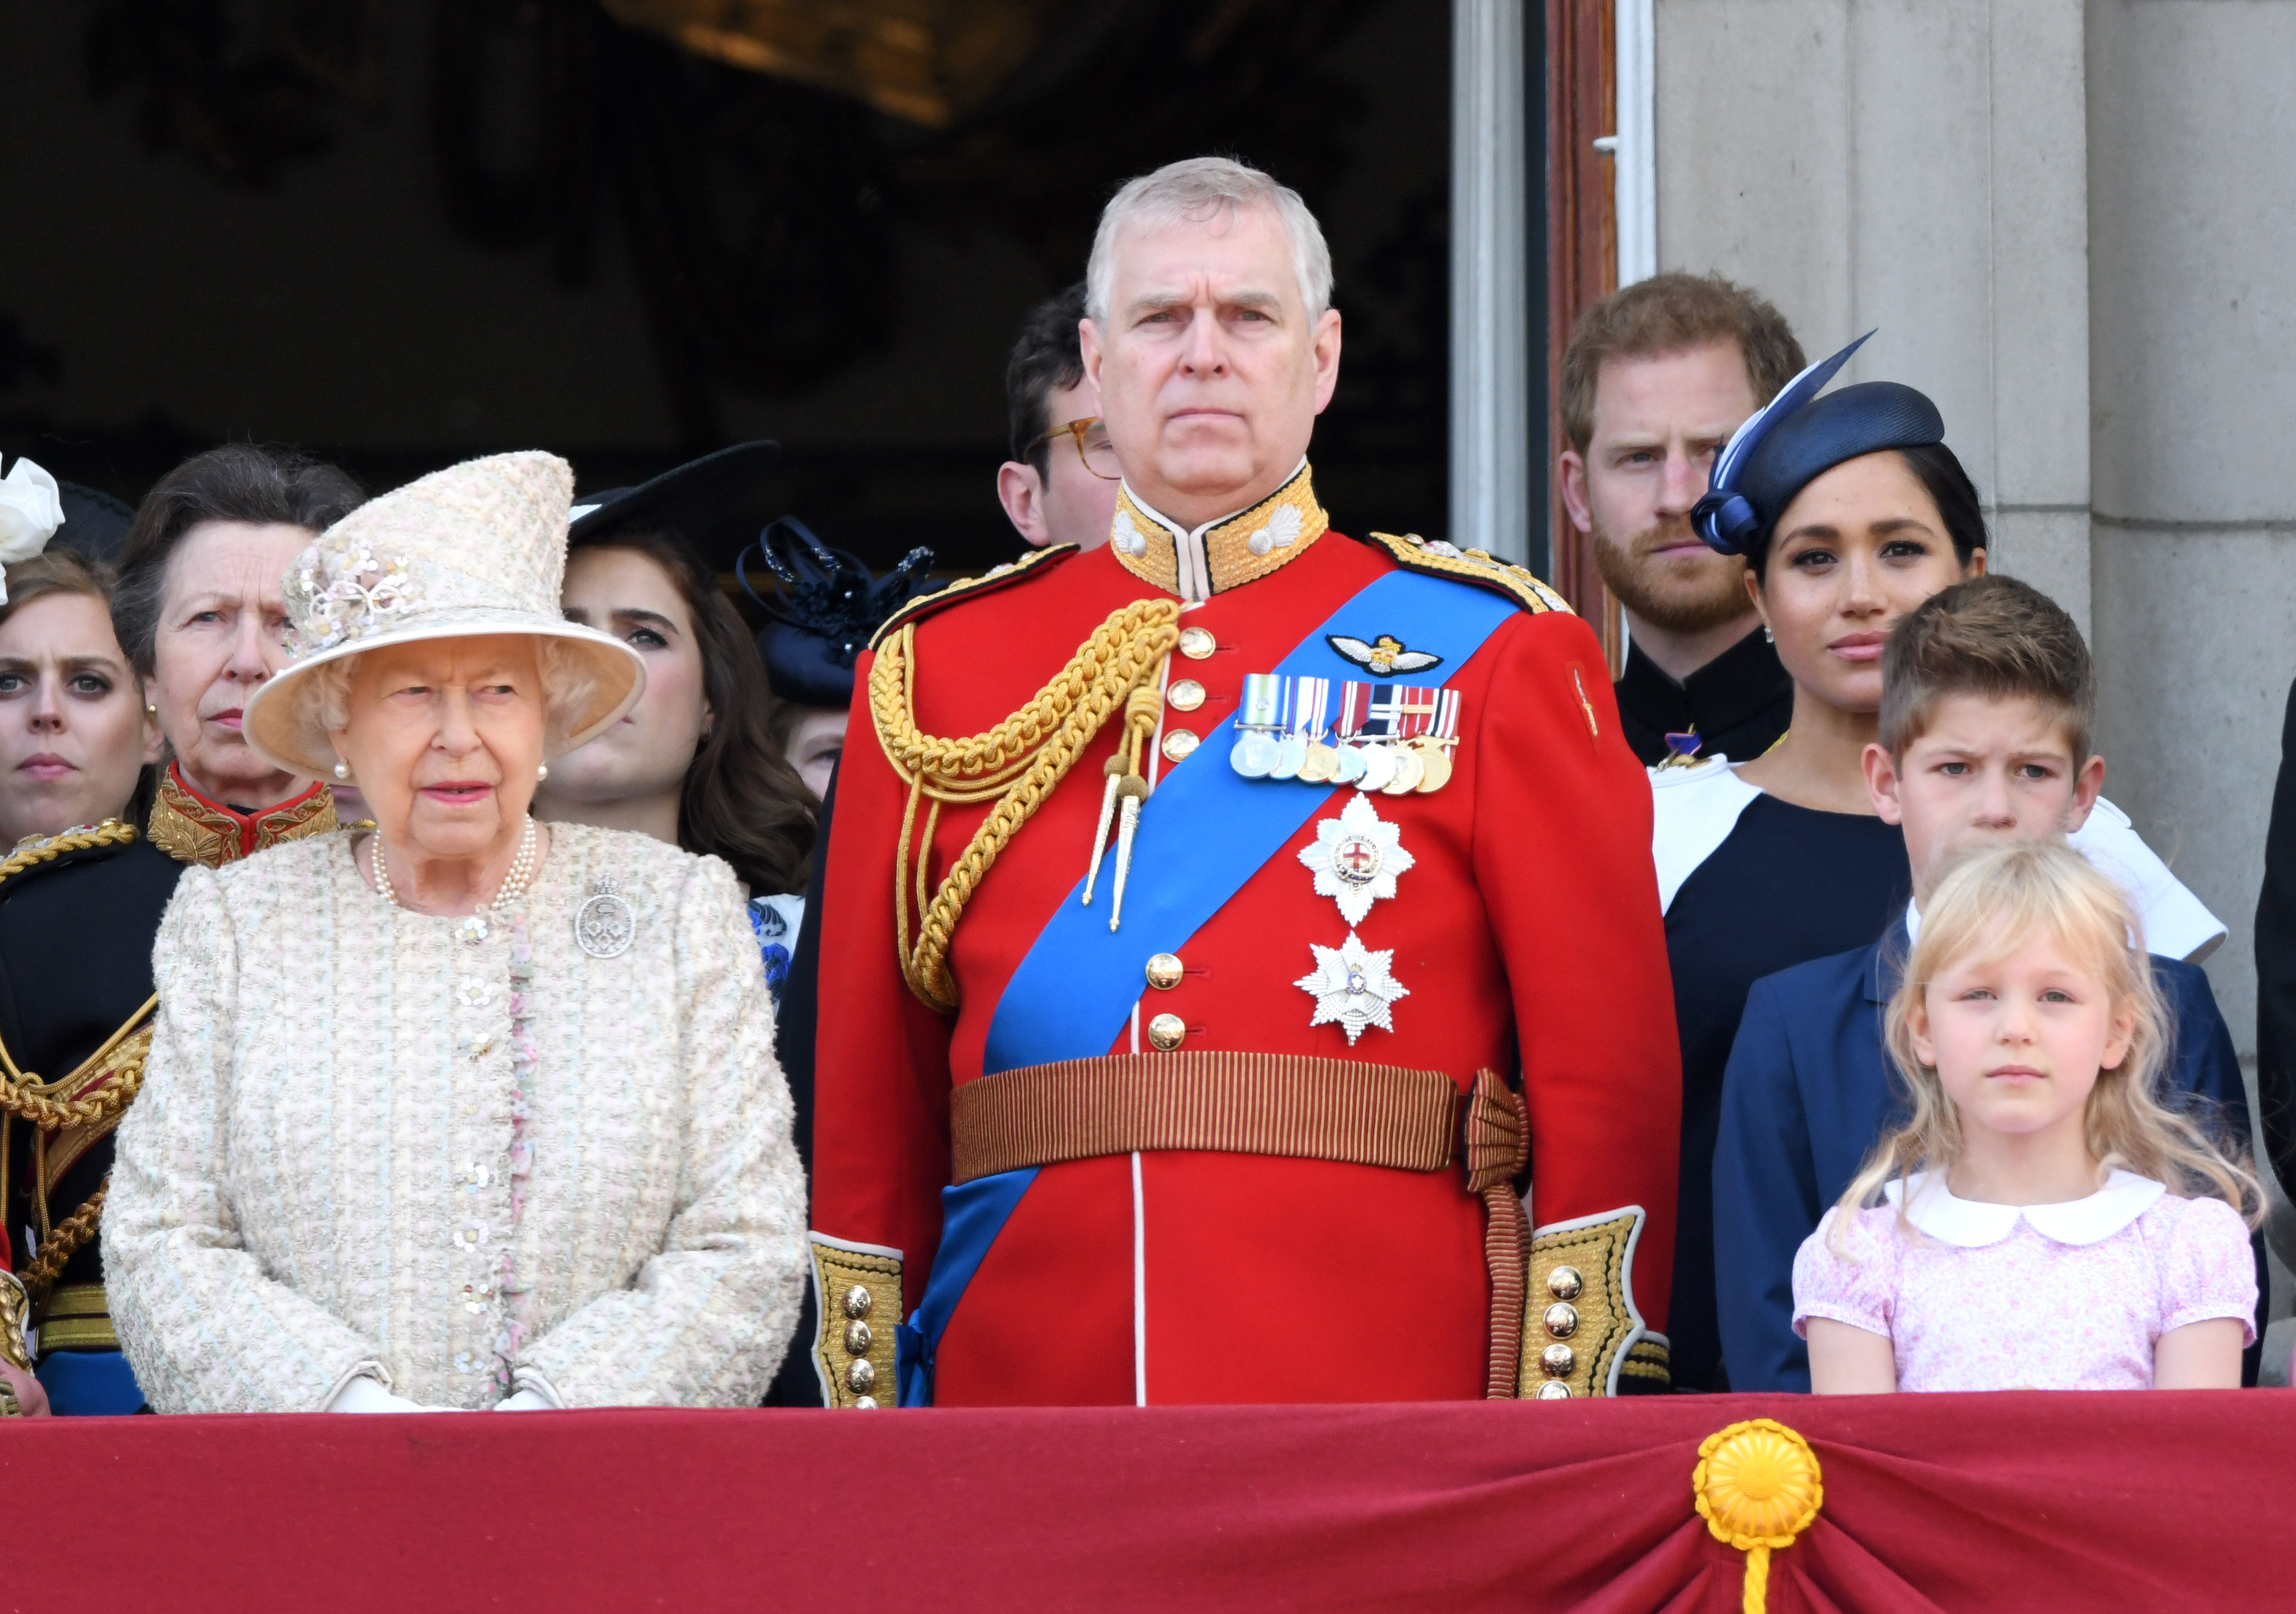 Members of the royal family including Queen Elizabeth II, Prince Andrew, Prince Harry and Meghan Markle on the balcony during Trooping The Colour